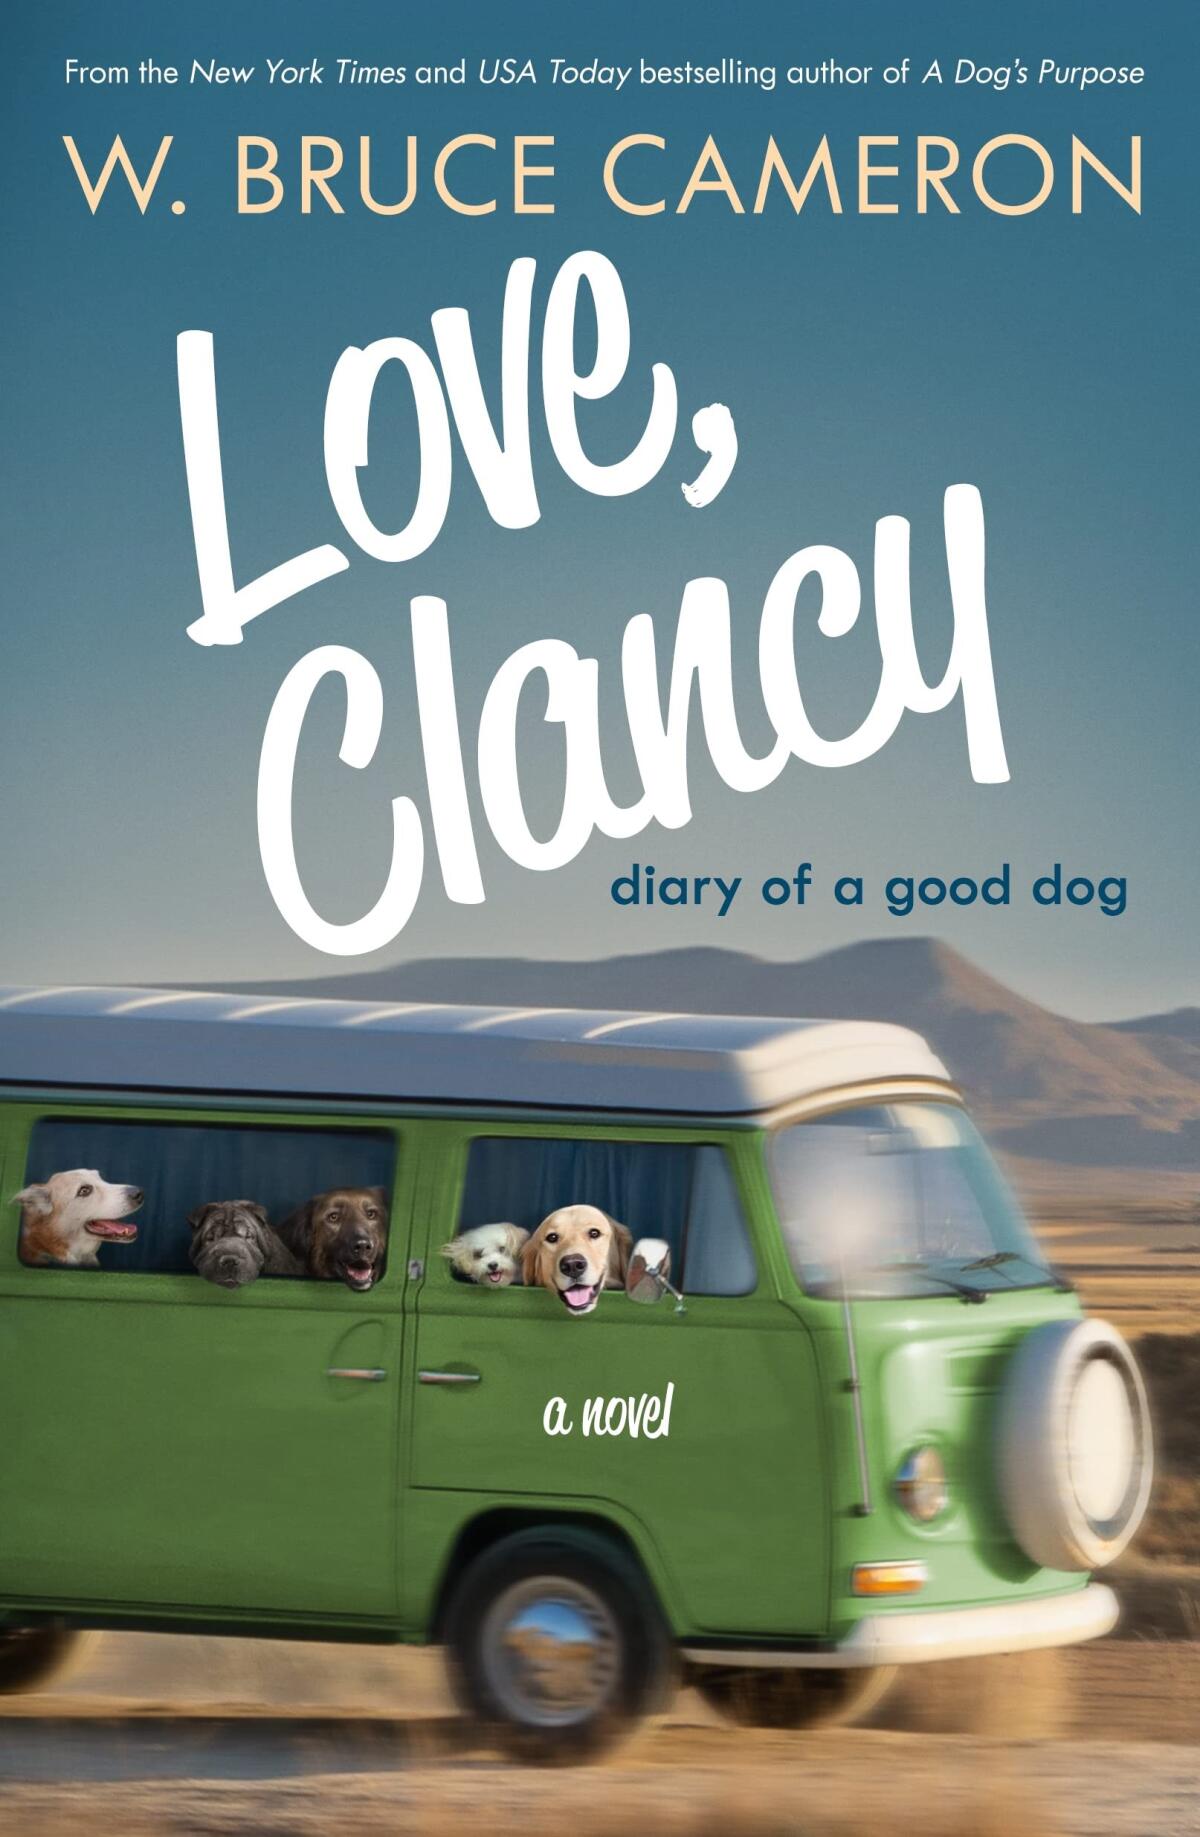 "Love Clancy: Diary of a Good Dog" by W. Bruce Cameron.